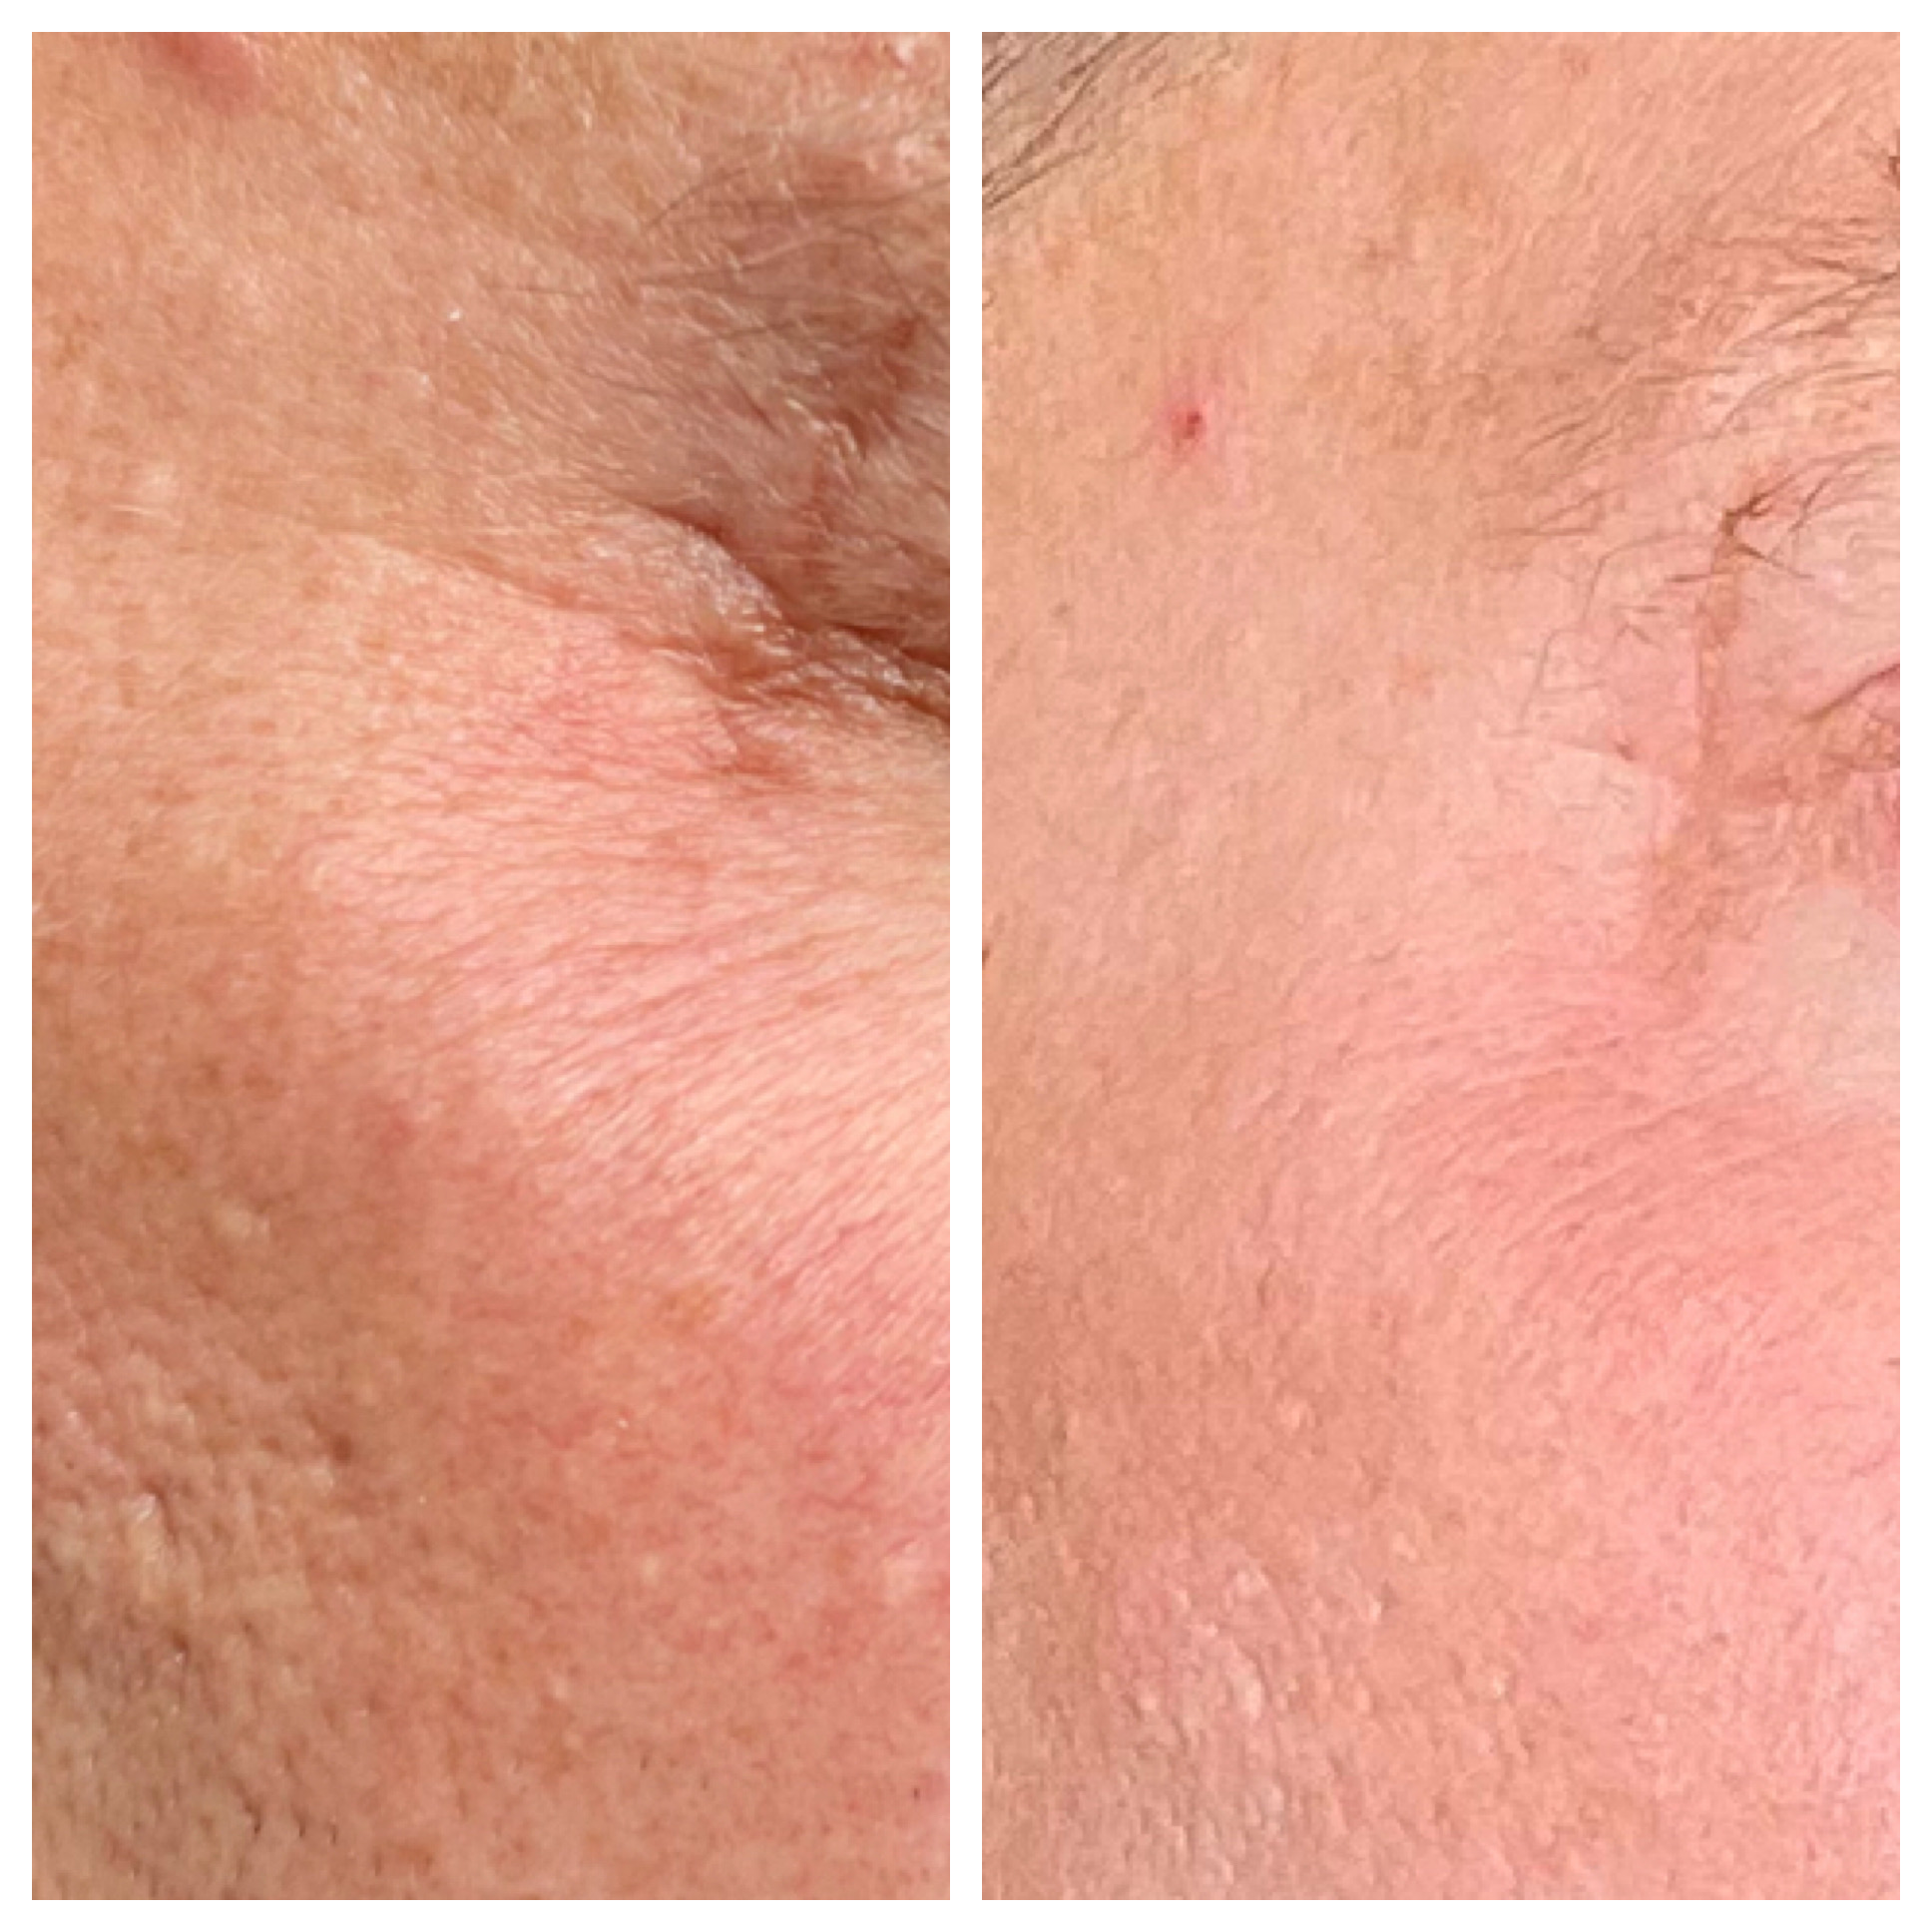 NeoGen Plasma- Scar Revision before & after treatment photos in Leominster, MA | Opulent Aesthetics and Wellness